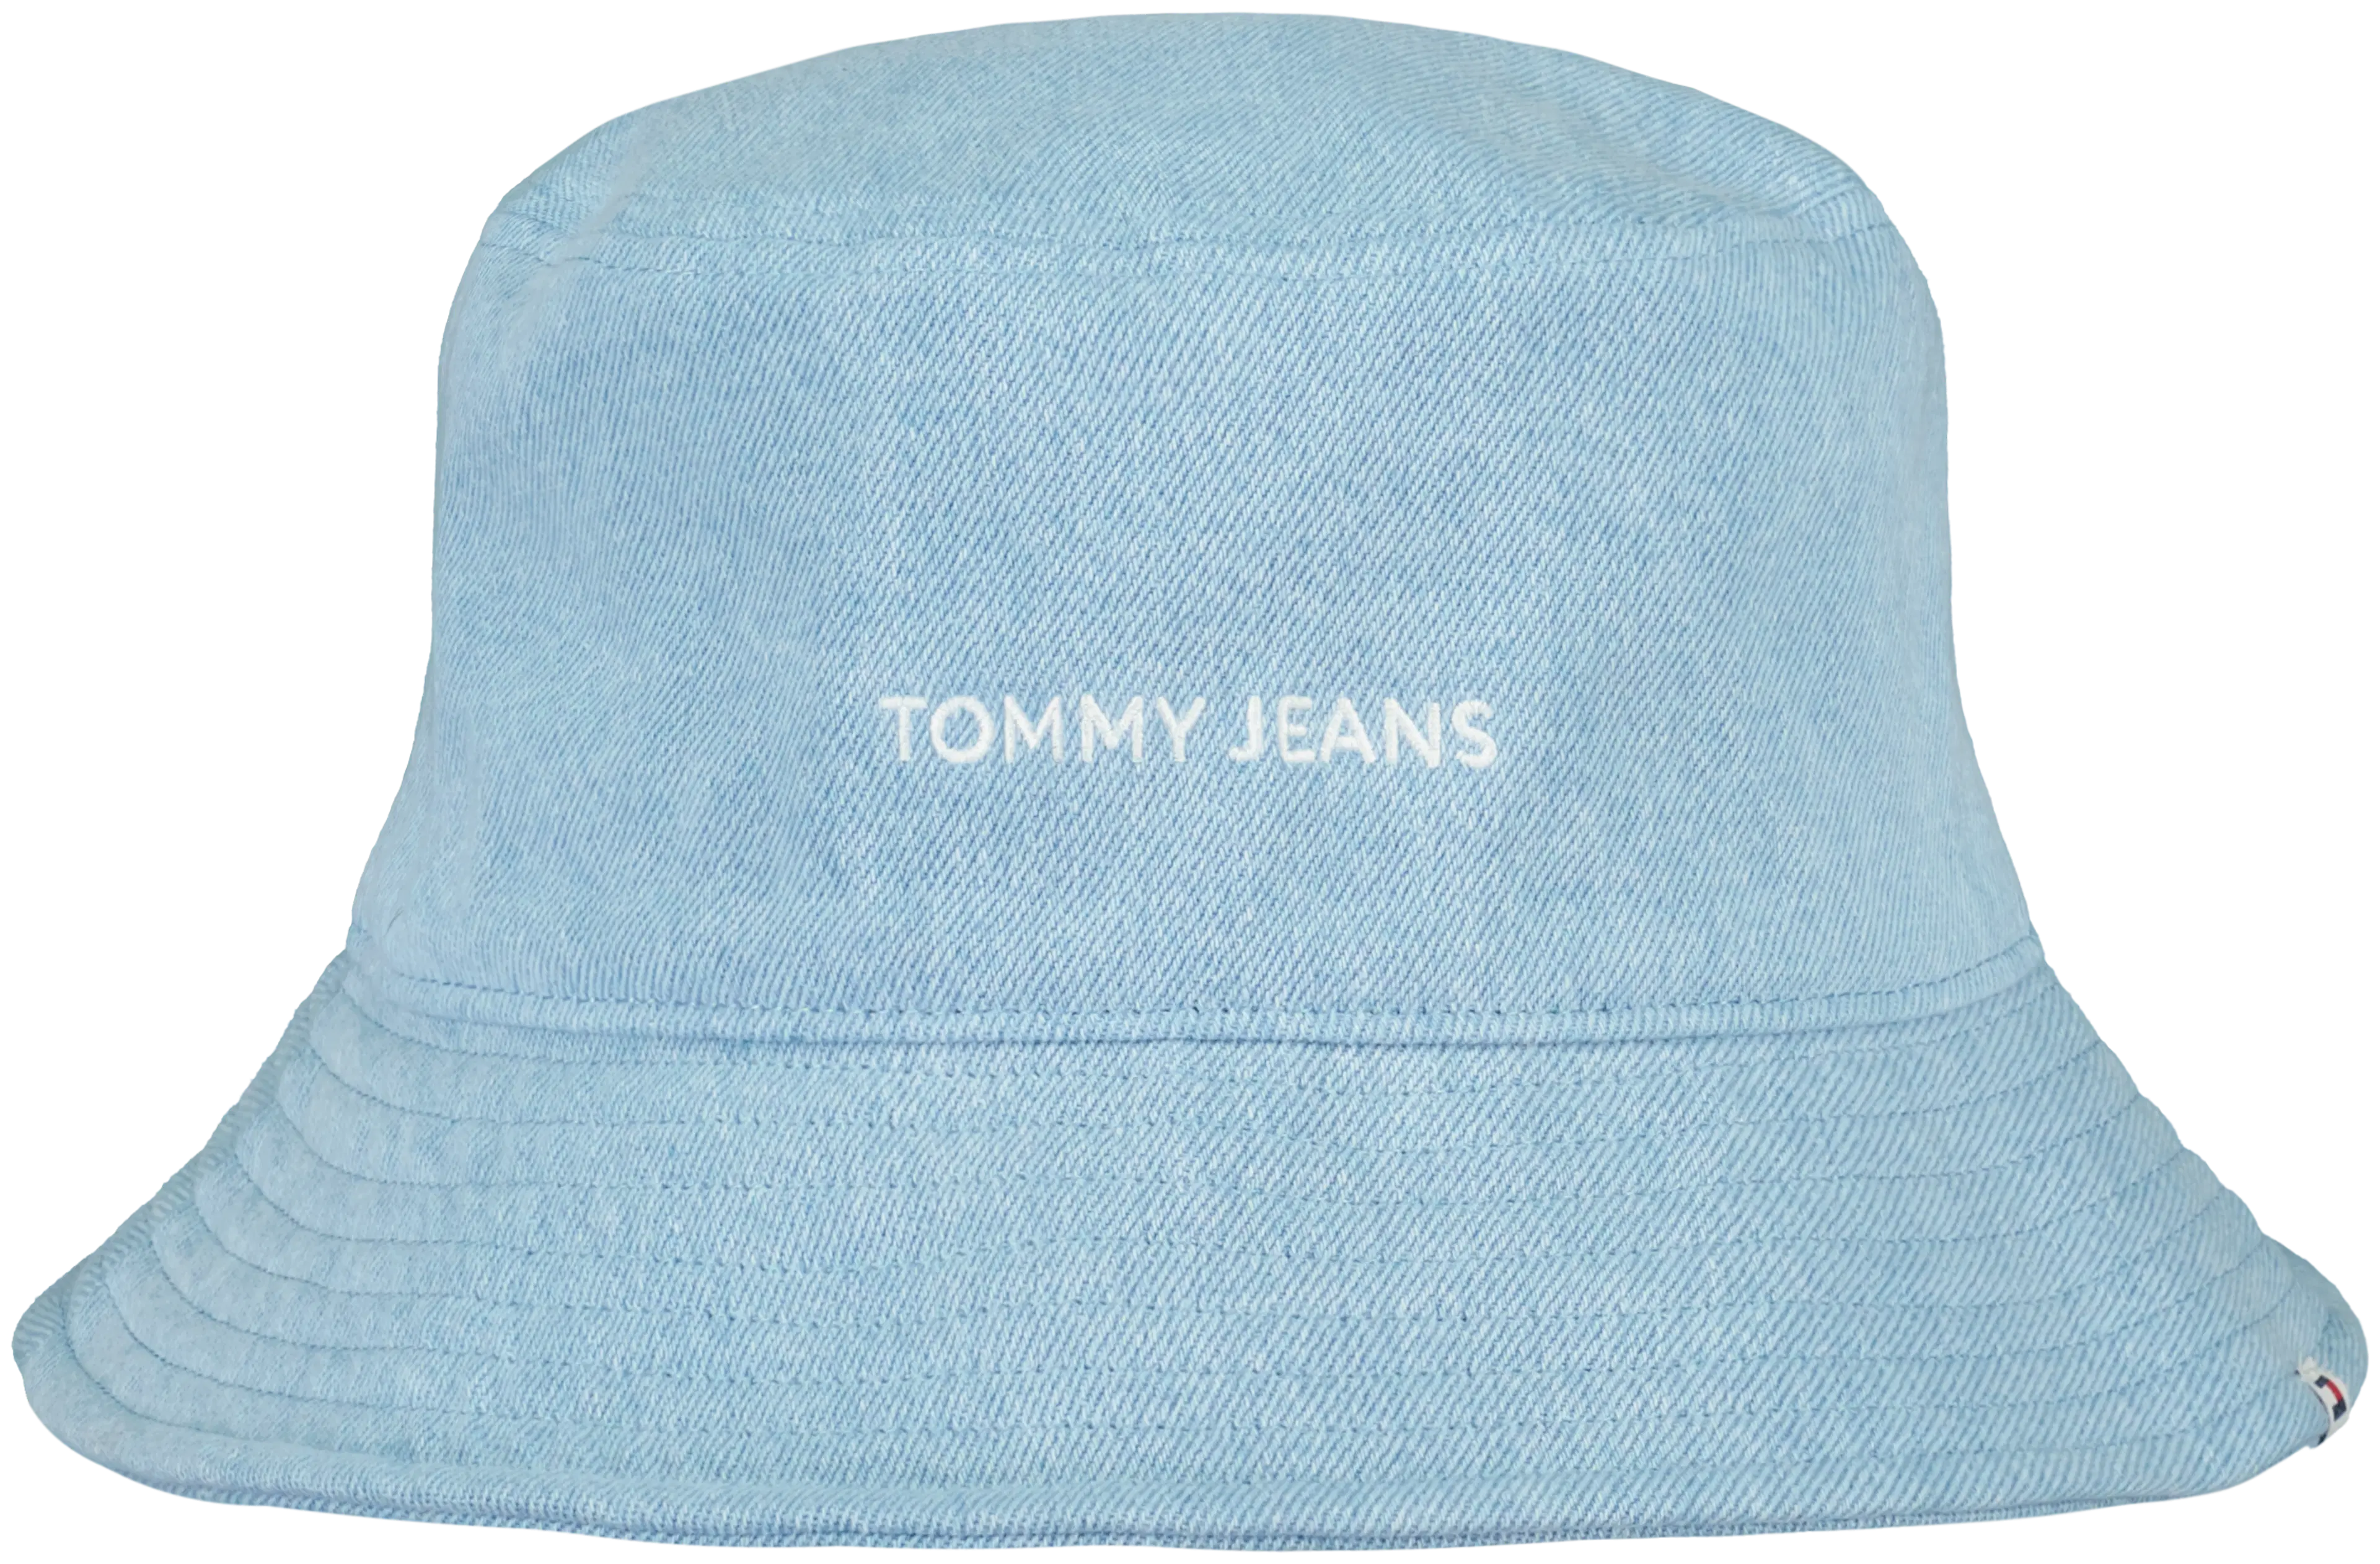 Tommy Jeans buckethat